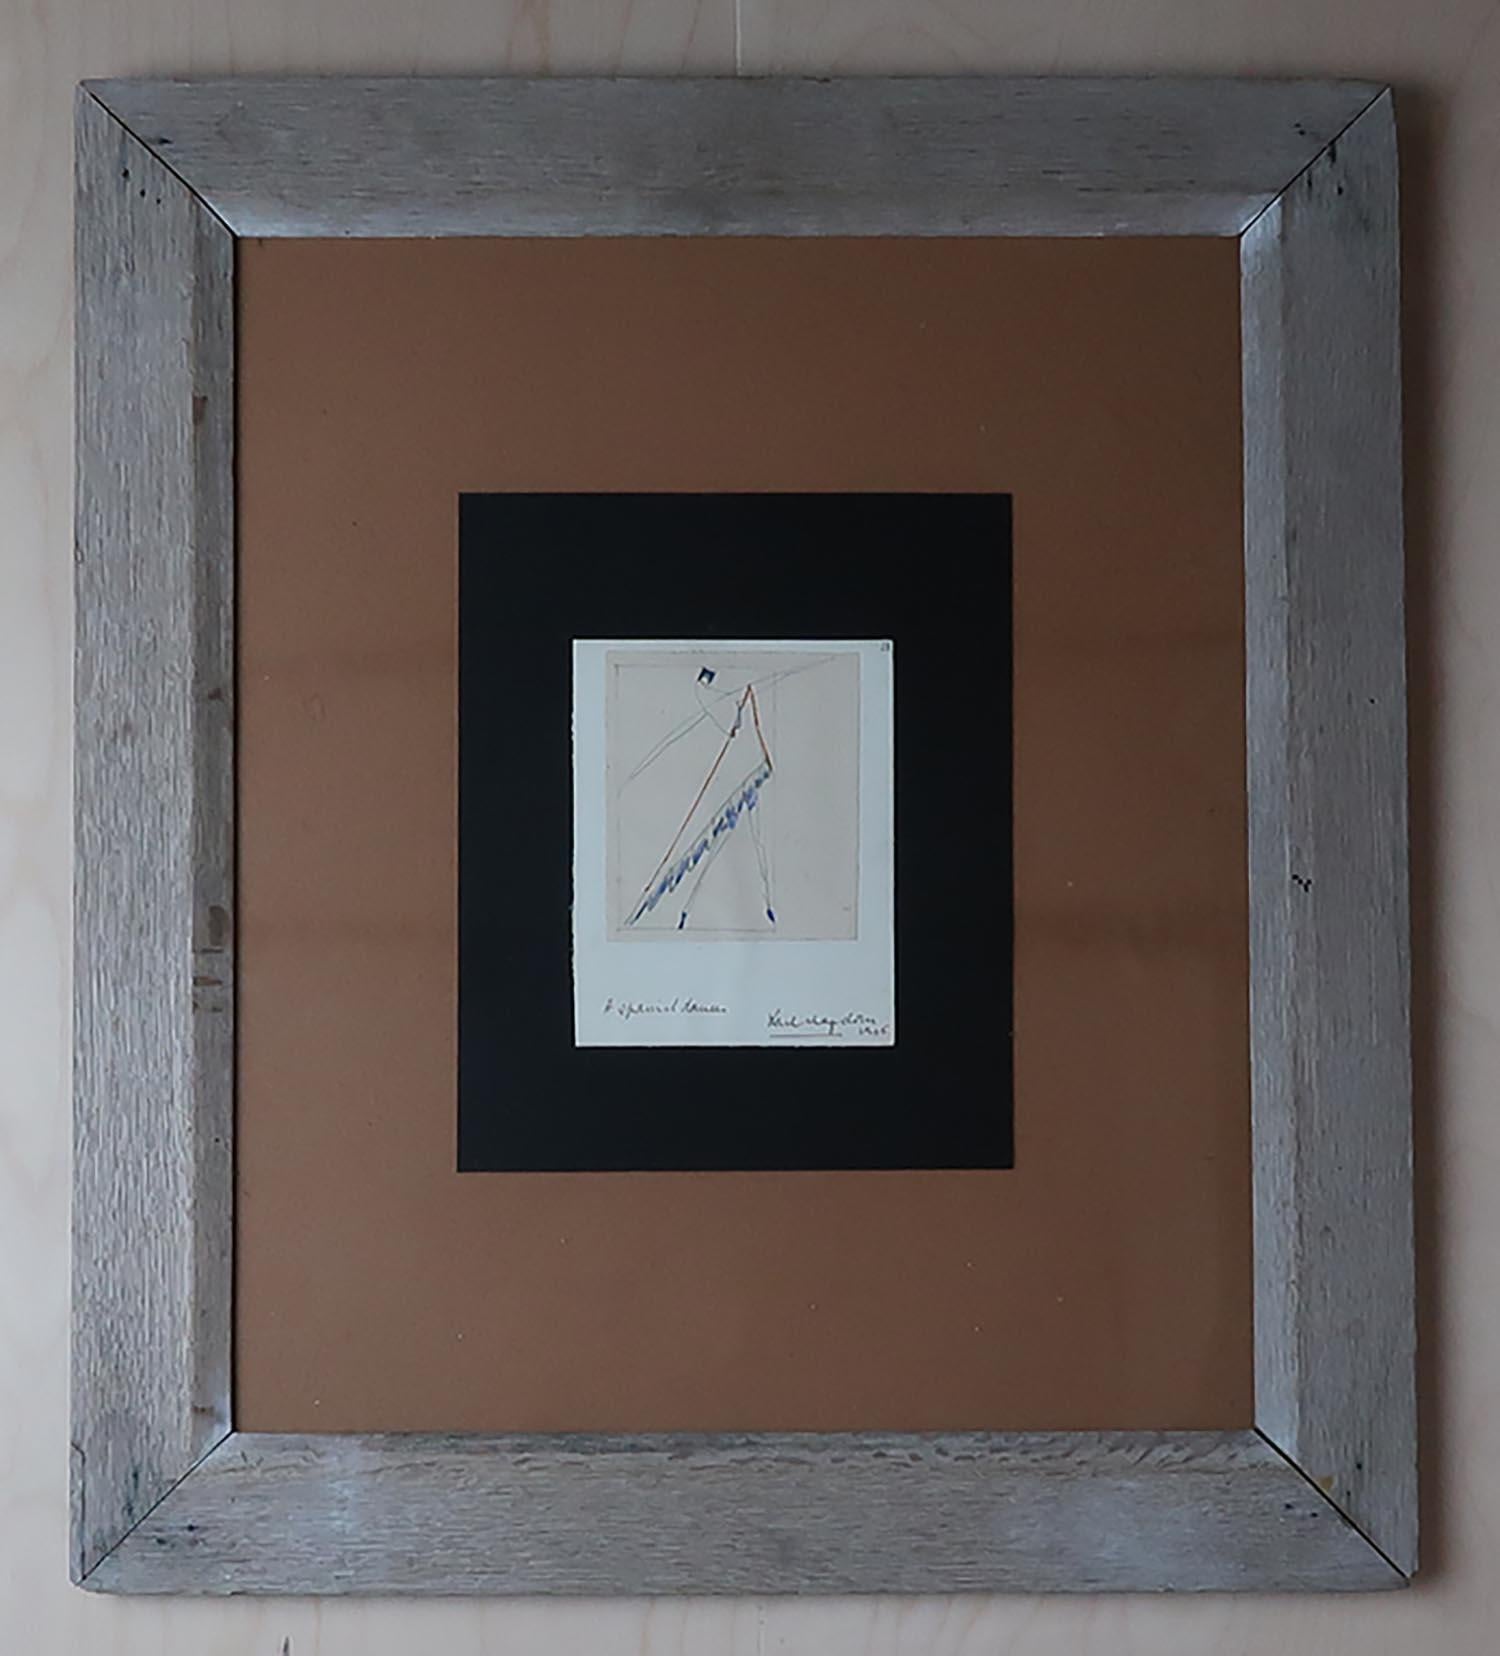 Wonderful drawing of a Spanish dancer by Karl Hagedorn.

Displaying the characteristic futurist, cubist and Bauhaus influences reminiscent of his early work.

Signed and dated 1915.

Tastefully presented in an antique distressed oak frame. The